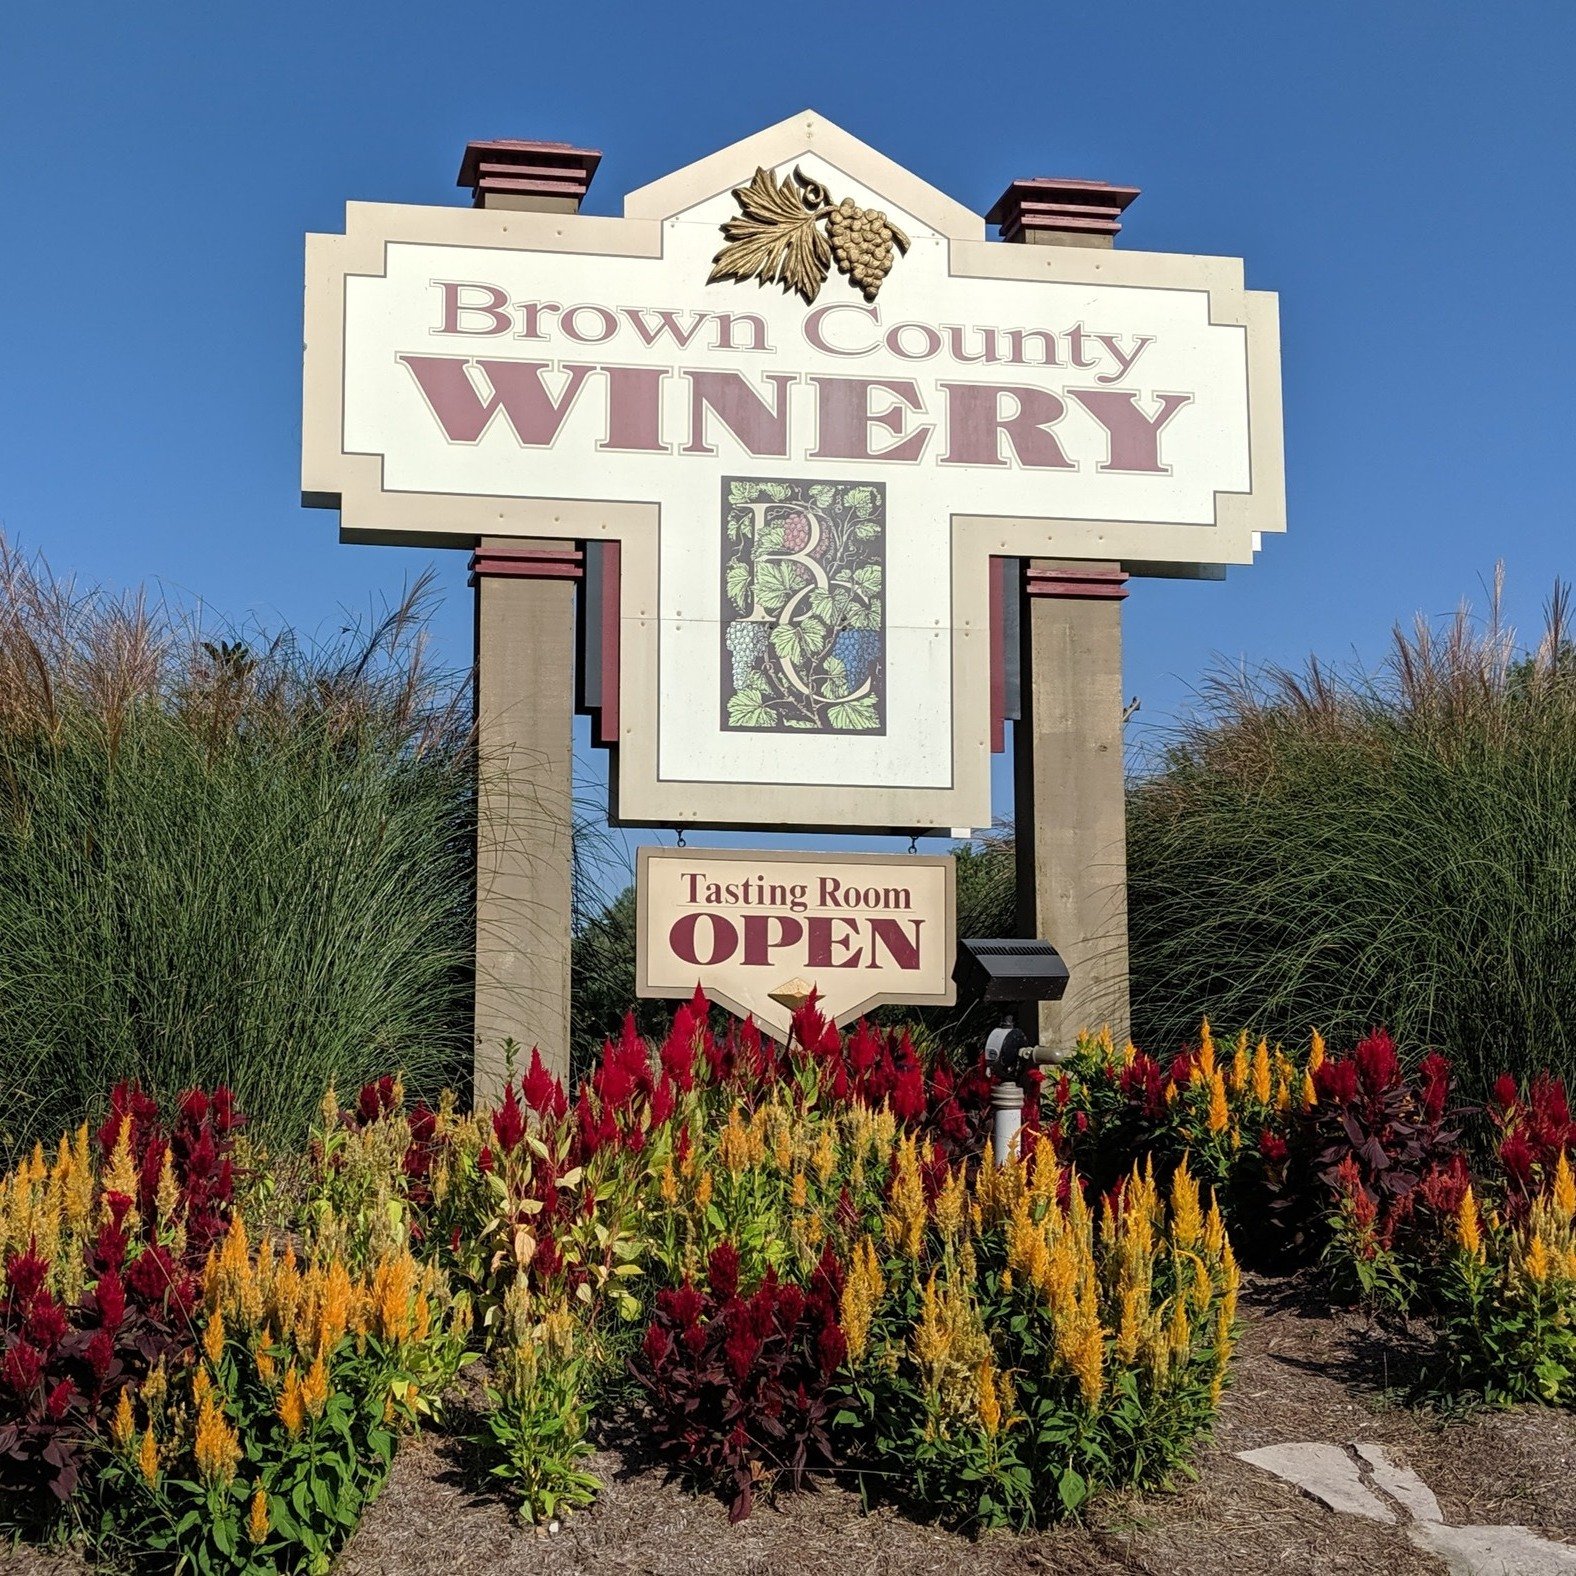 We are launching a brand new WINE CLUB!! Wine Club members will receive 3 shipments a year of 3 bottle each at a 15% discount.  We have three different clubs to offer; Dry, Variety, and Sweet.  View all of the details and sign up today at www.brownco